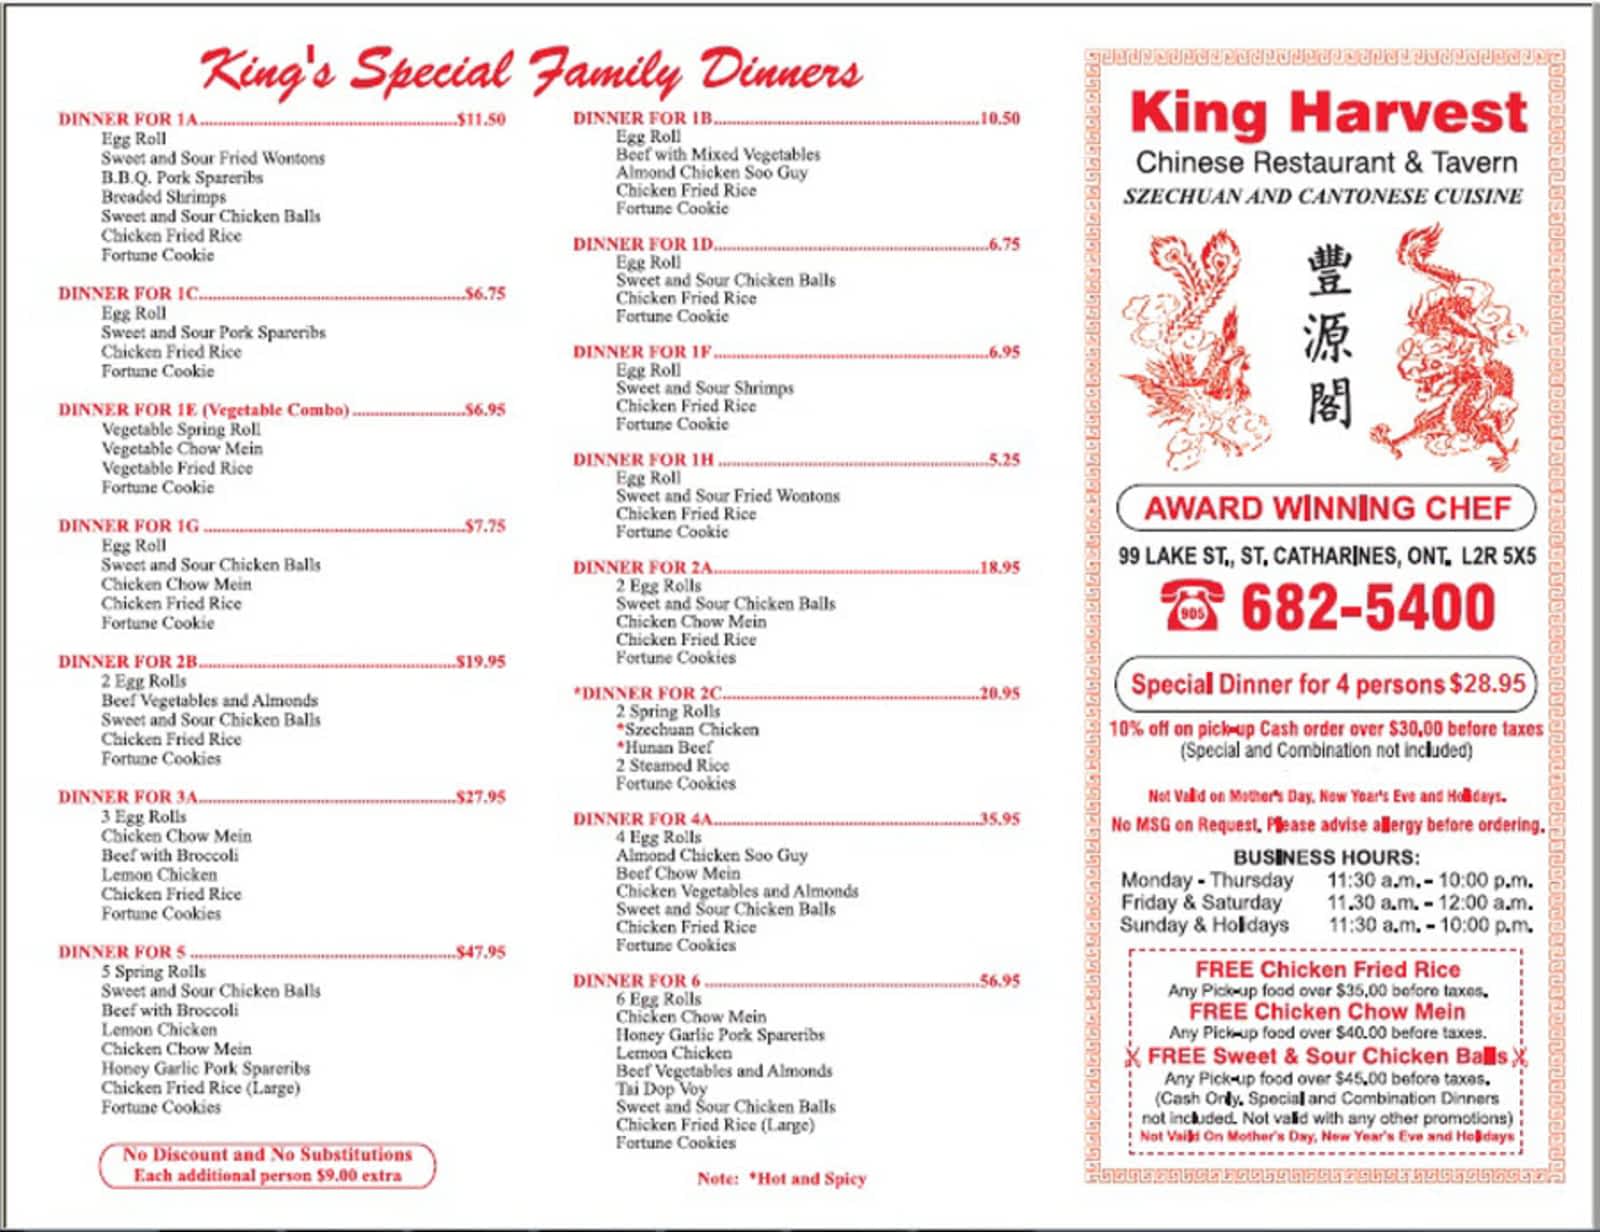 King Harvest Chinese Restaurant - Opening Hours - 99 Lake St St Catharines On